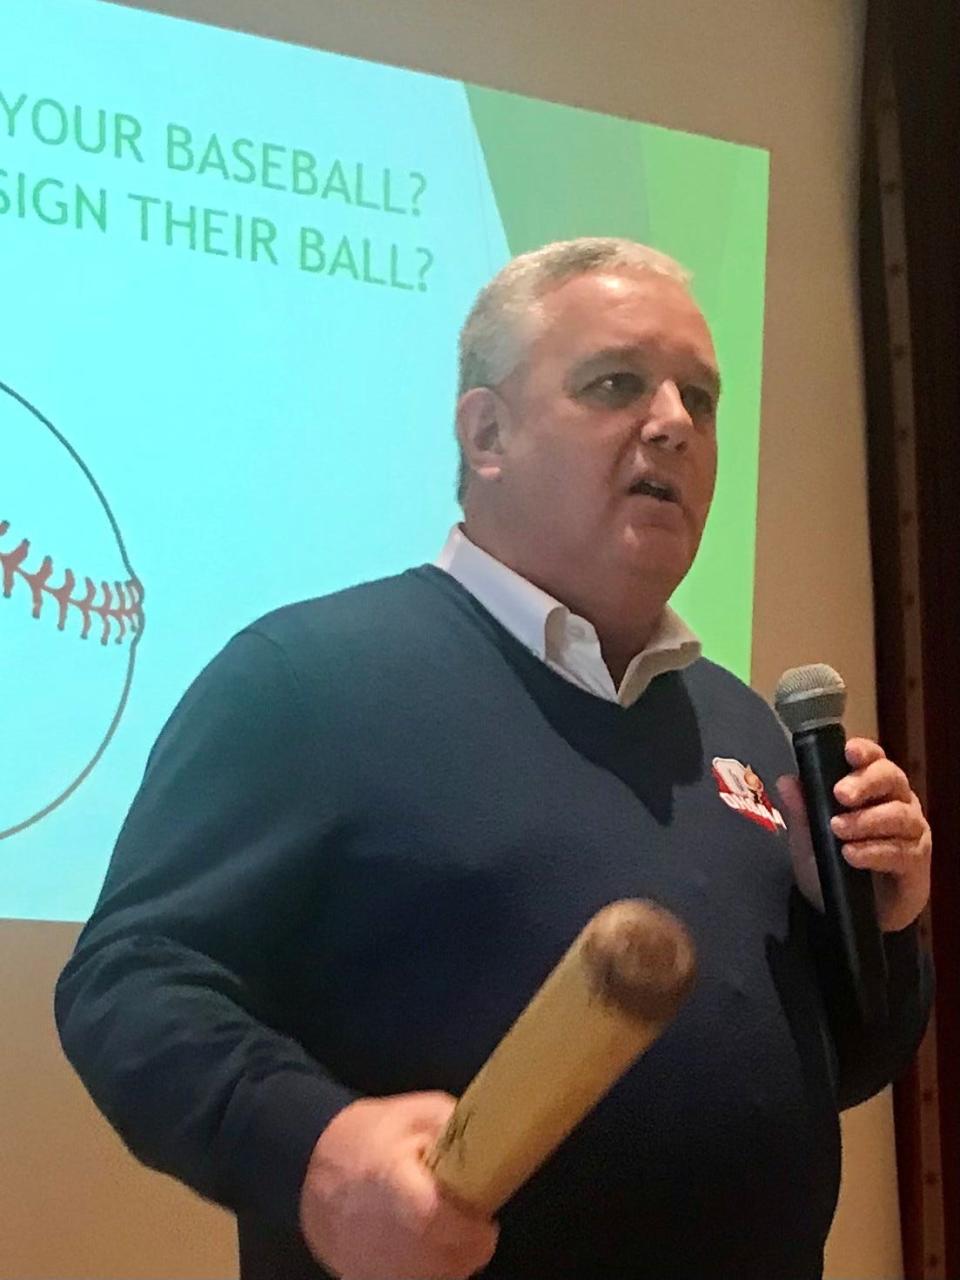 Local athletics directors believe that Executive Director Doug Ute and the Ohio High School Athletics Association will eventually adopt rules that allow student-athletes to profit off their name, image and likeness.